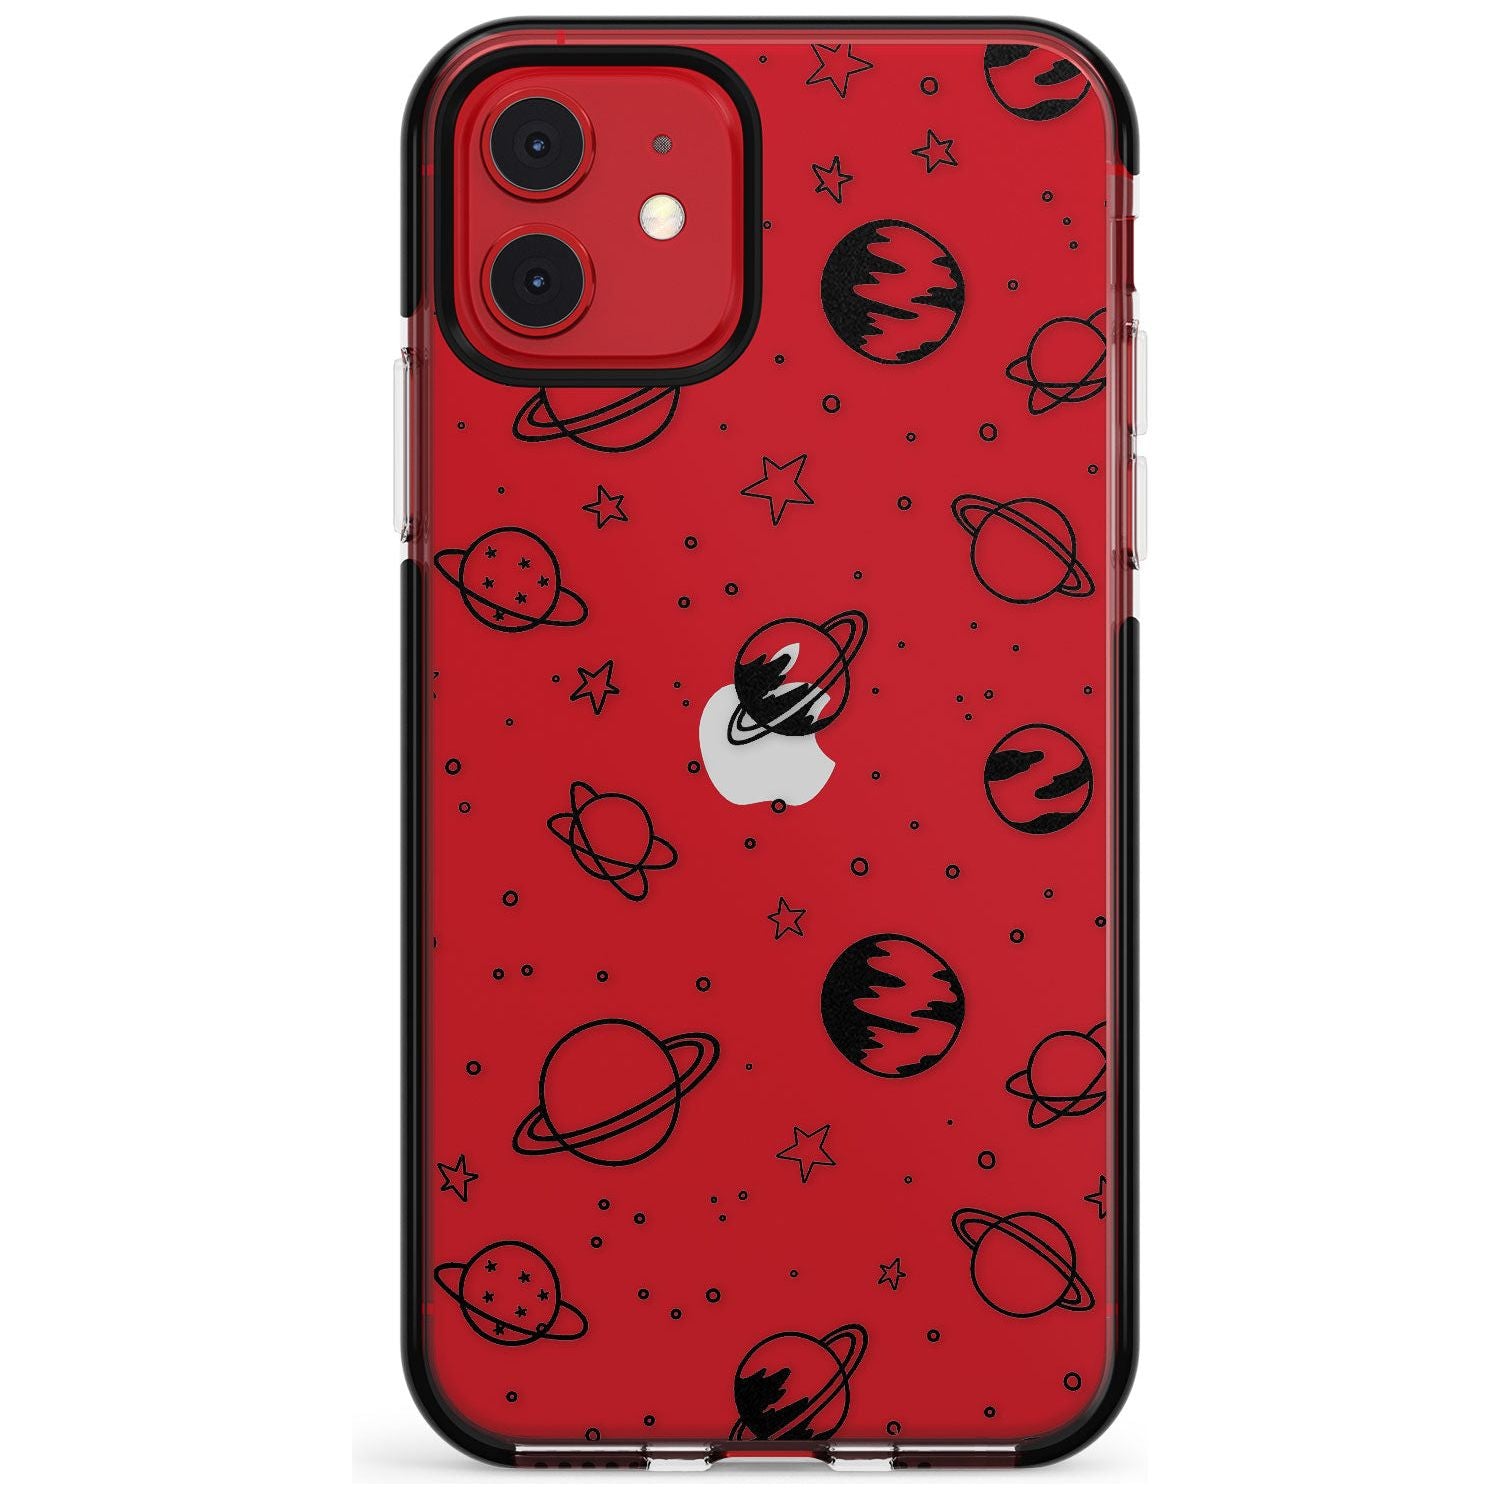 Outer Space Outlines: Black on Clear Pink Fade Impact Phone Case for iPhone 11 Pro Max